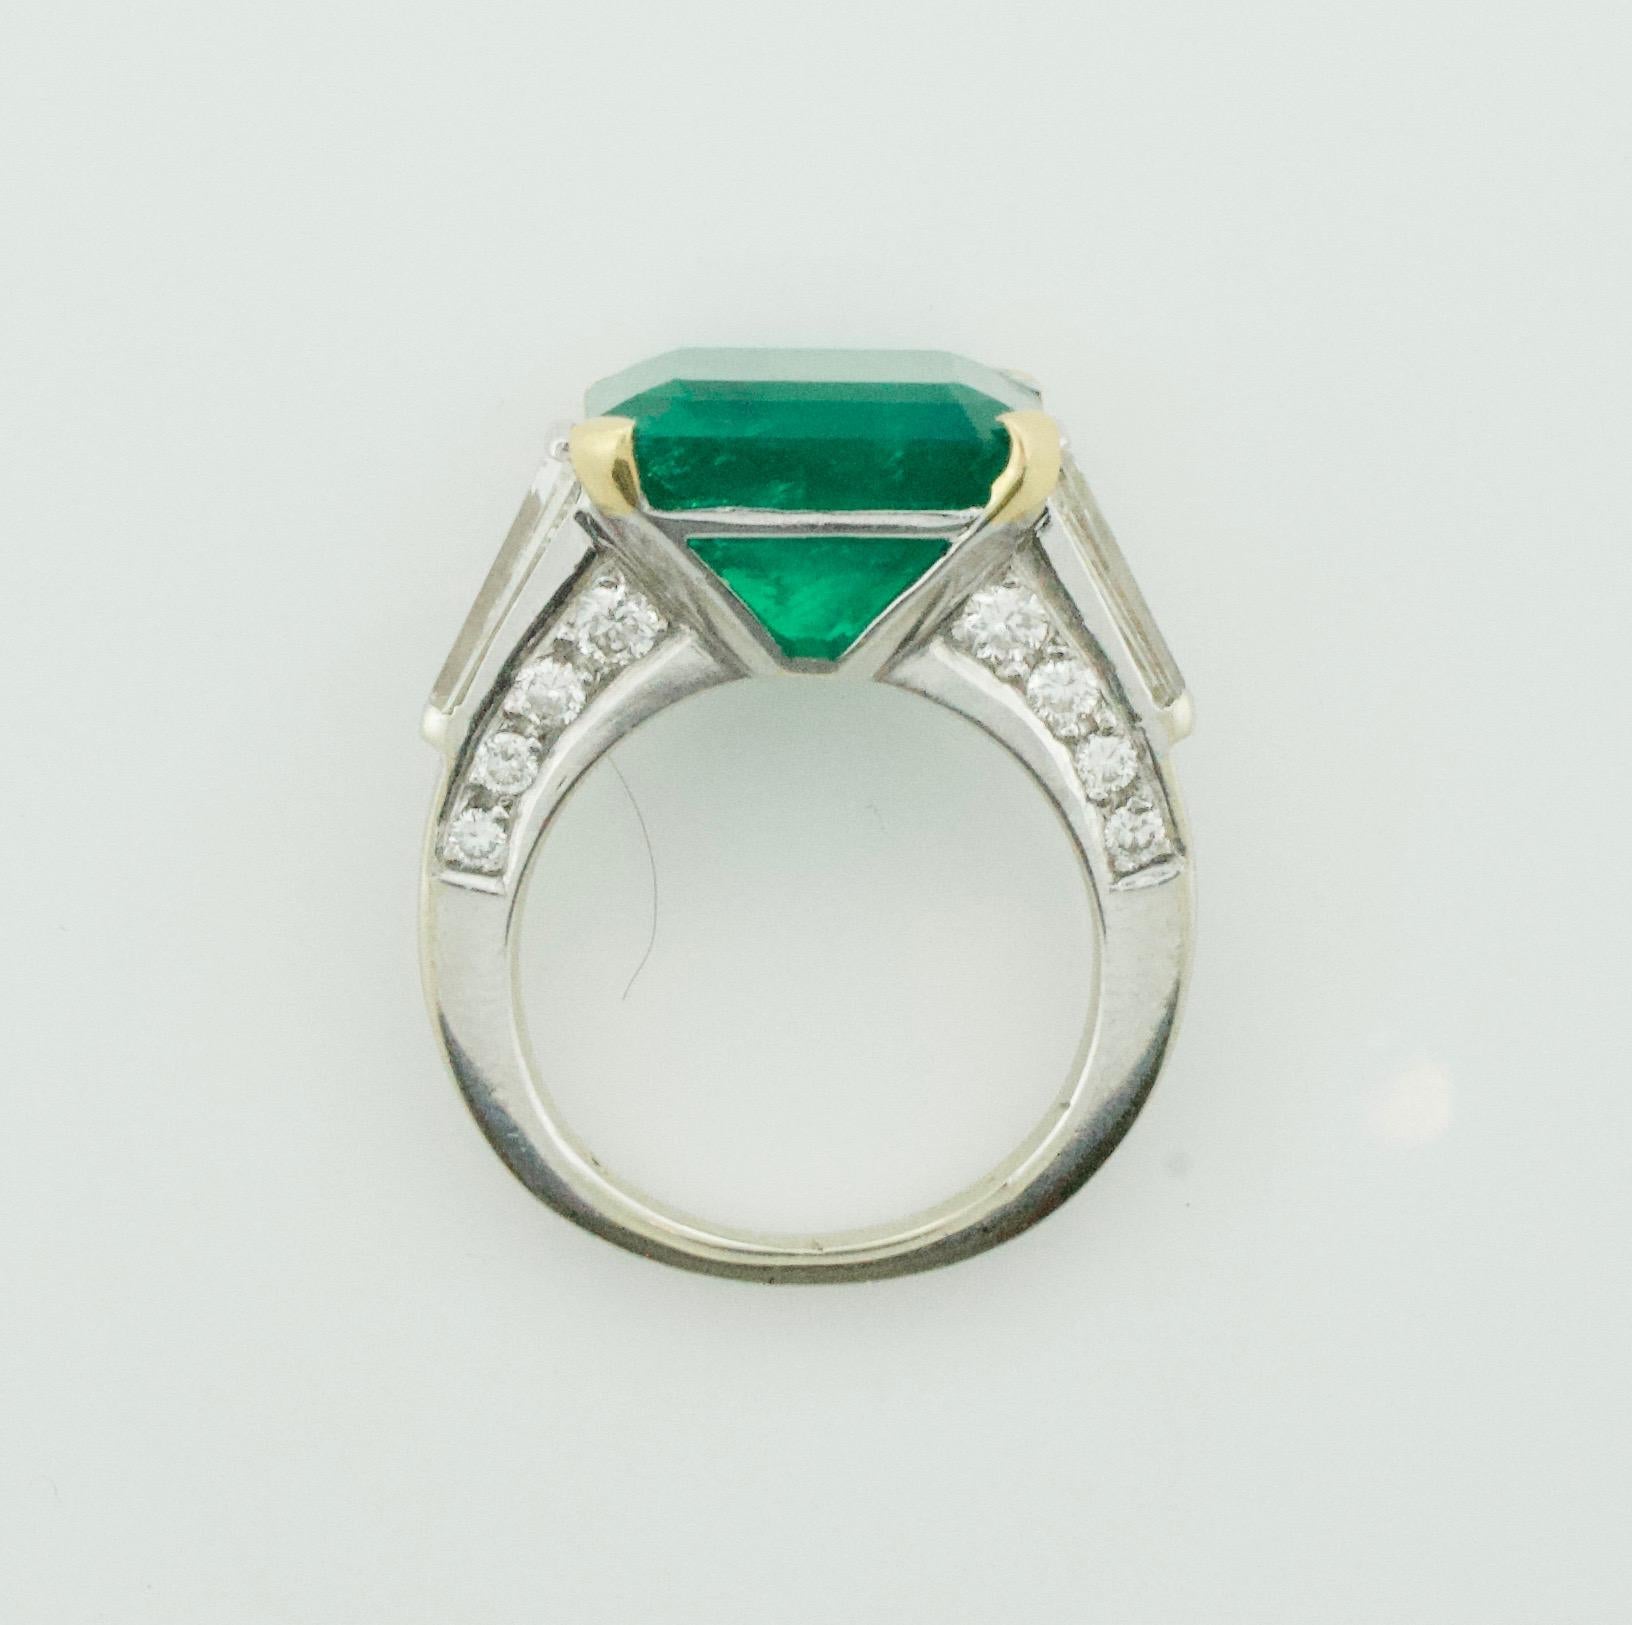 
Stunning Platinum Emerald/Diamond Ring, meticulously crafted to exude elegance and sophistication. This captivating piece features:

🔹 1 Emerald Cut Emerald: An awe-inspiring 9.18ct emerald, radiating unparalleled beauty and grace, certified by